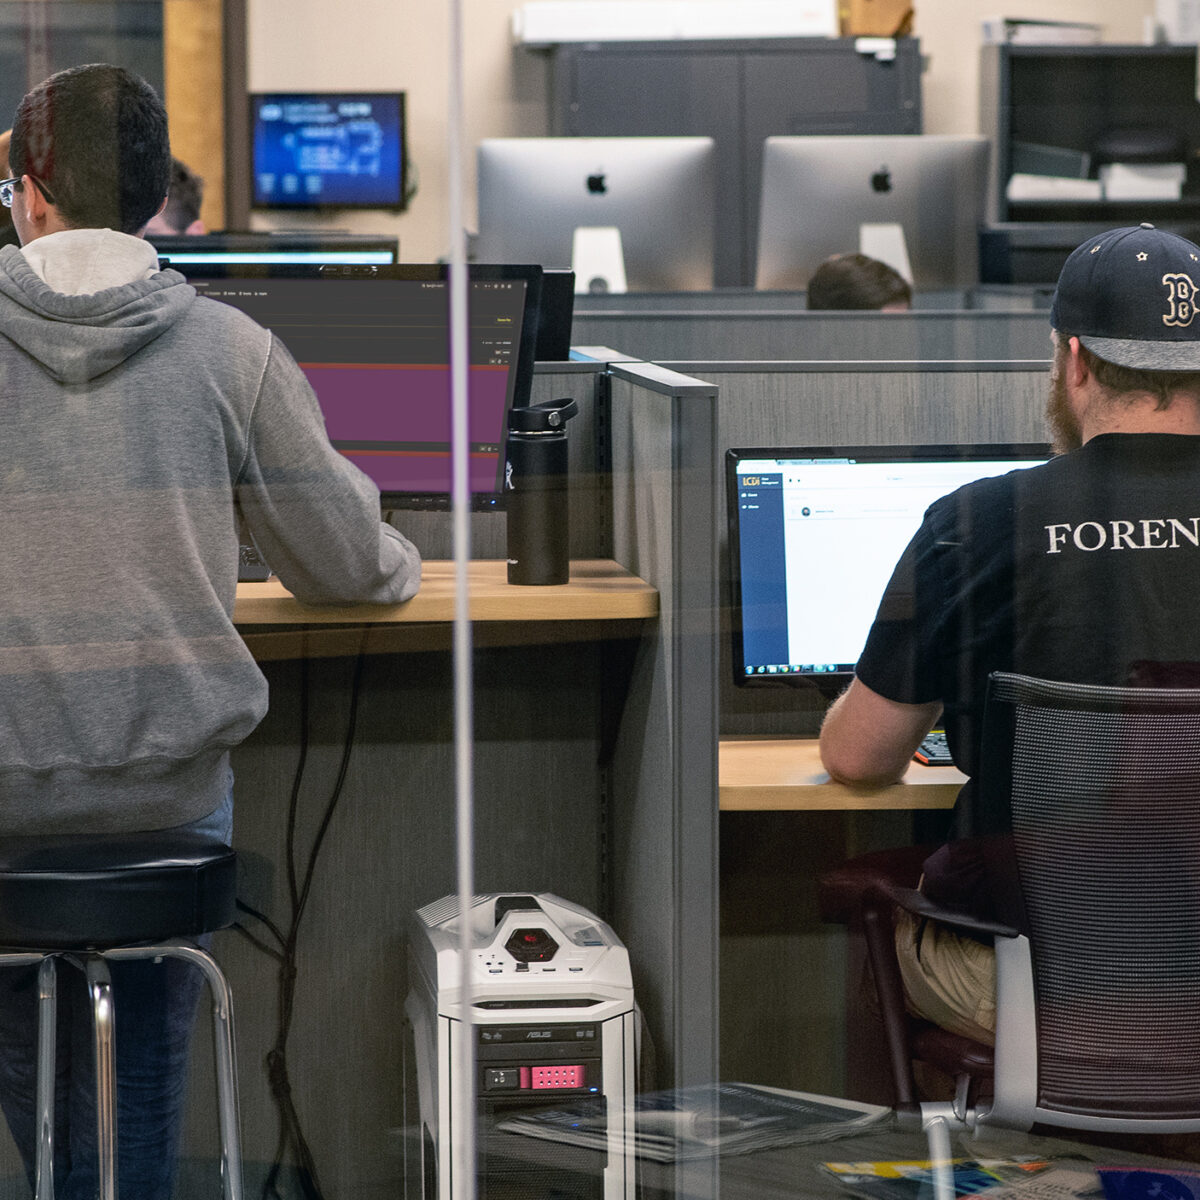 students facing computers; "forensics" on the back of student t-shirt